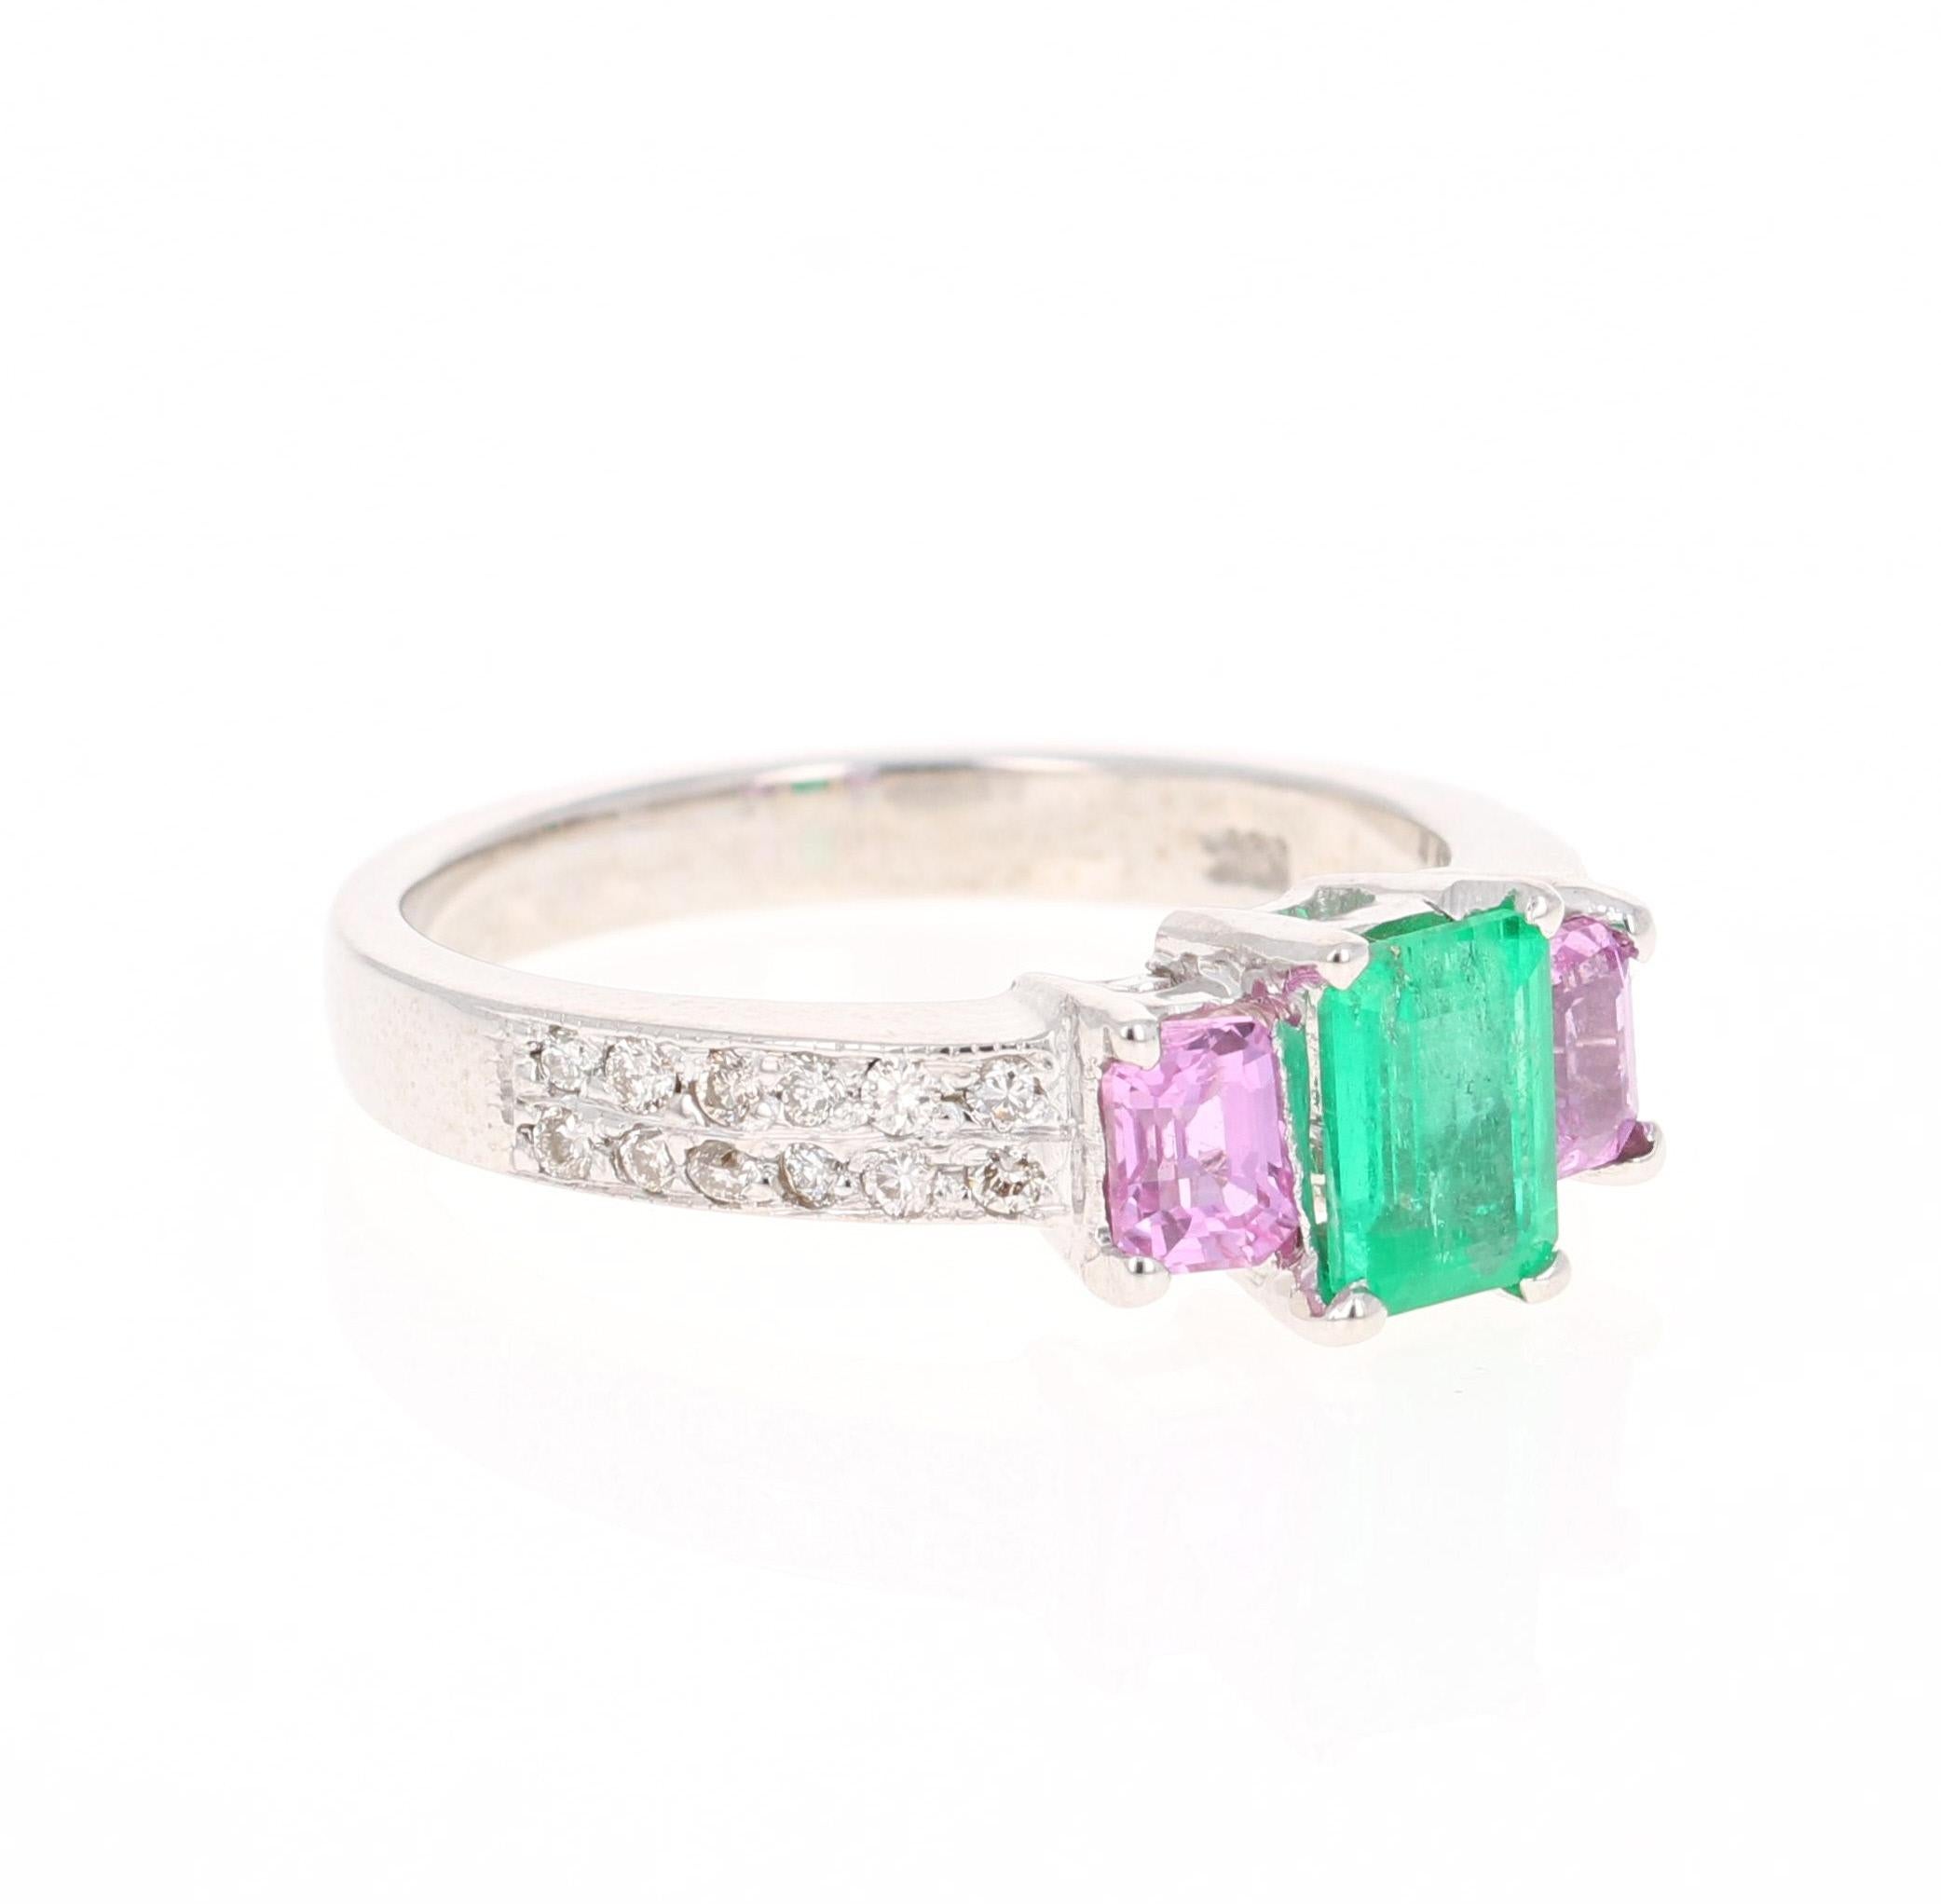 Beautiful and Unique Emerald, Pink Sapphire, and Diamond Three Stone Ring. A beautiful alternative to the classic diamond three stone ring. 

This ring has an Emerald Cut Green Emerald that weighs 0.65 Carats with 2 Emerald Cut Pink Sapphires on